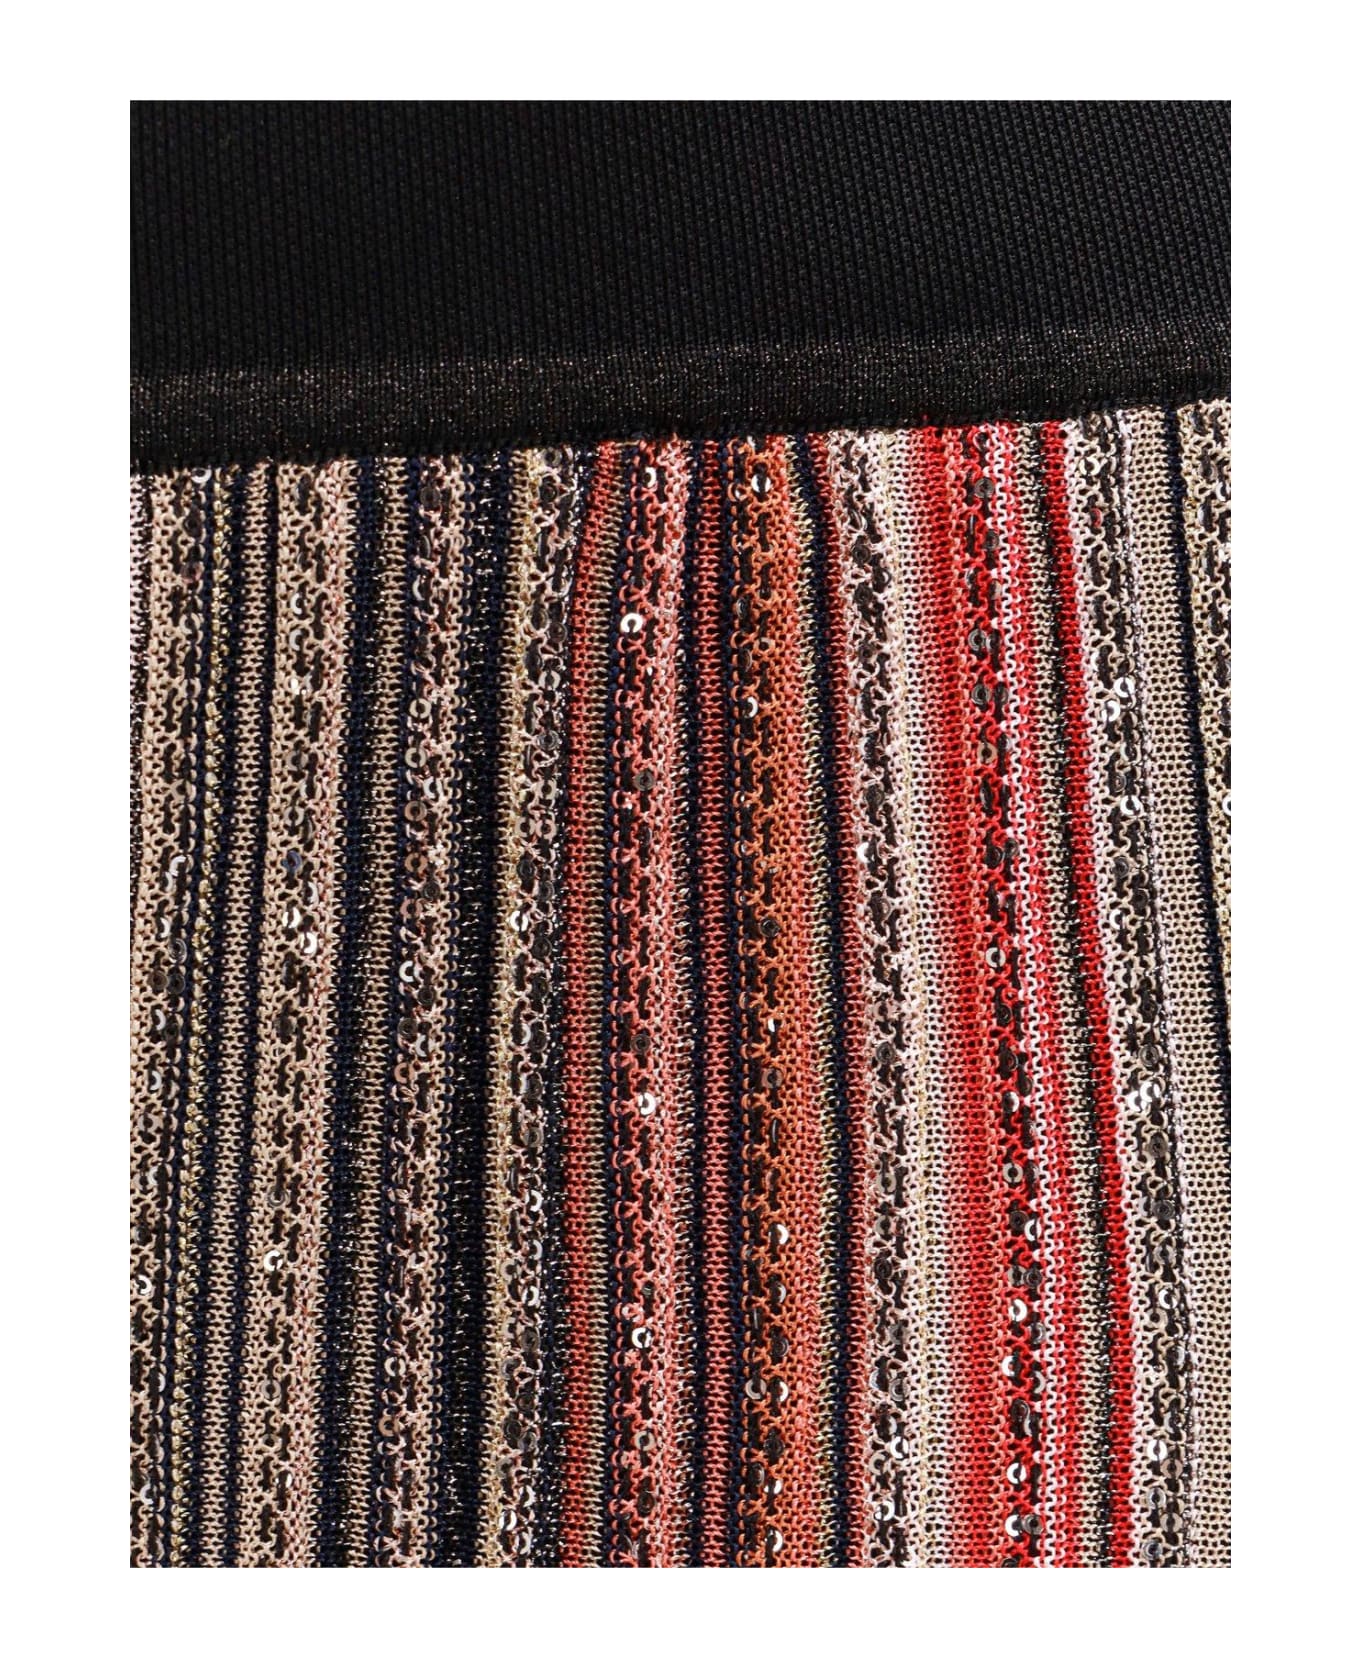 Missoni Sequins Striped Knit Trousers - MultiColour ボトムス